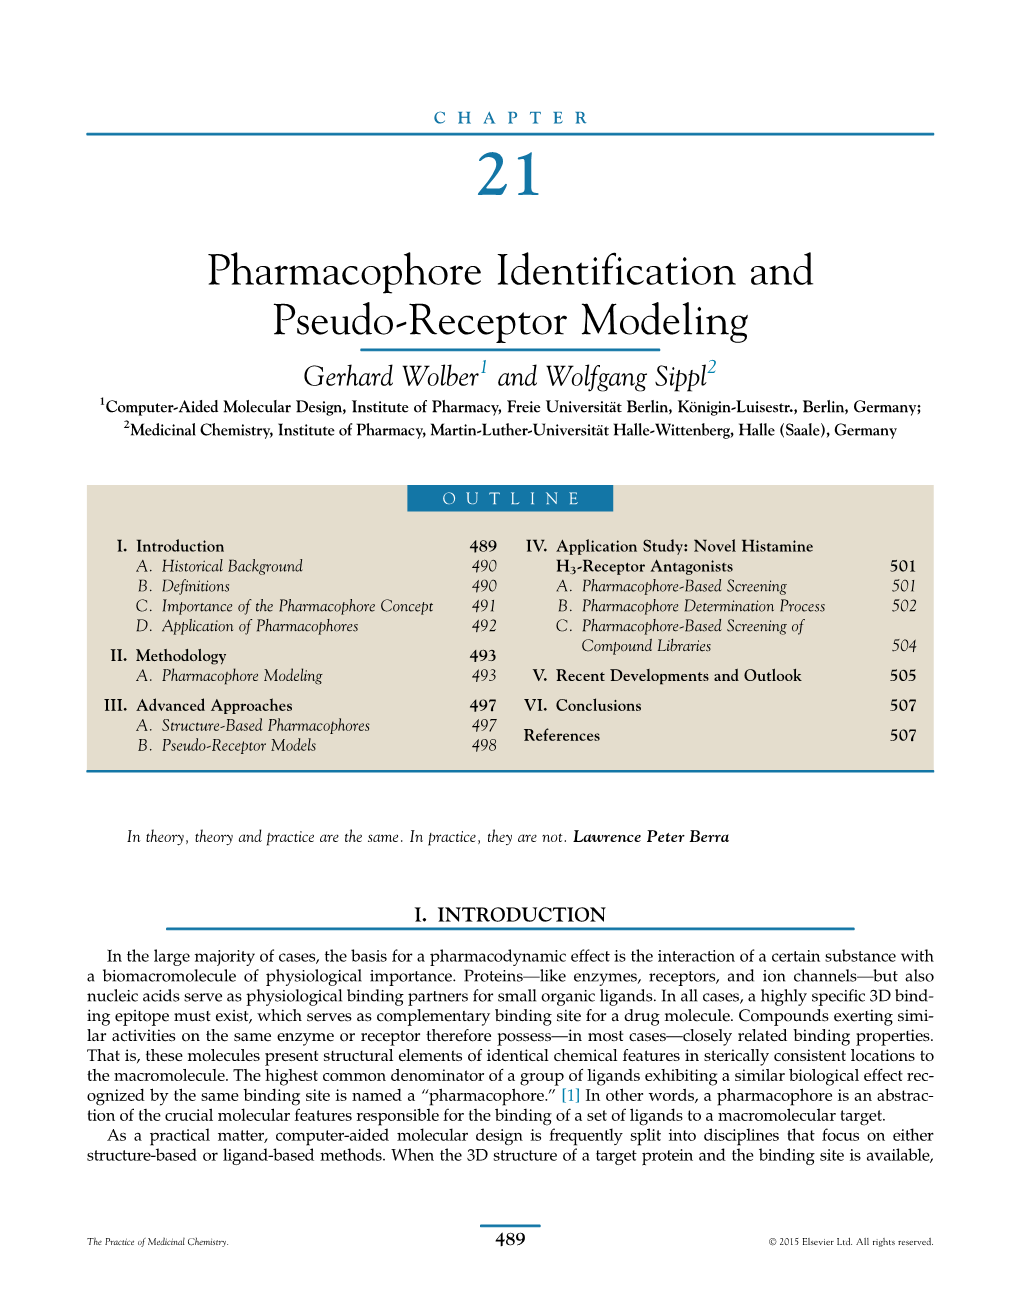 Chapter 21. Pharmacophore Identification and Pseudo-Receptor